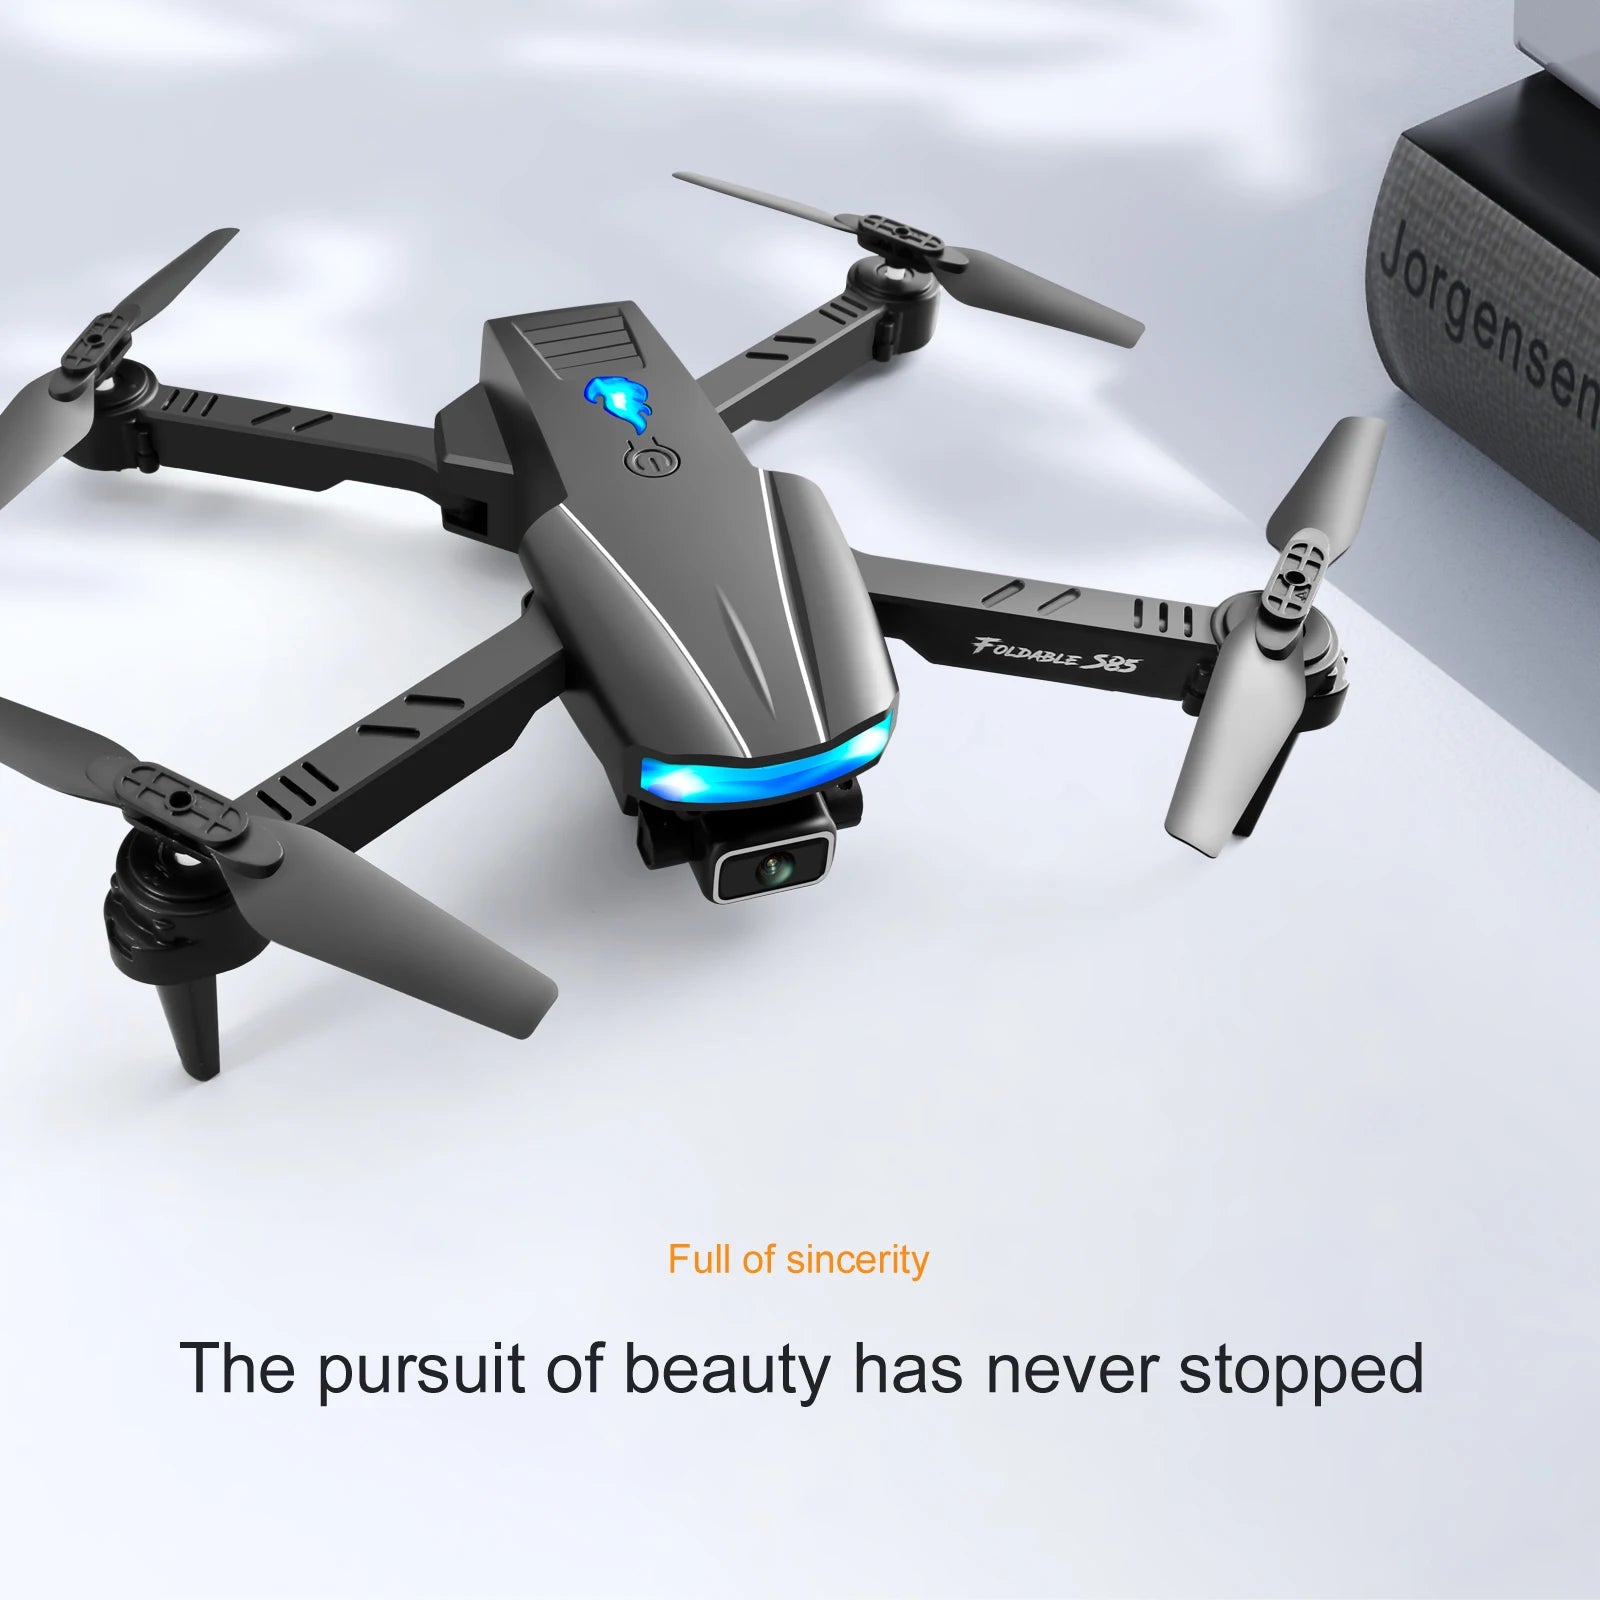 S85 Drone, vorgensen foldable 383 is full of sincerity